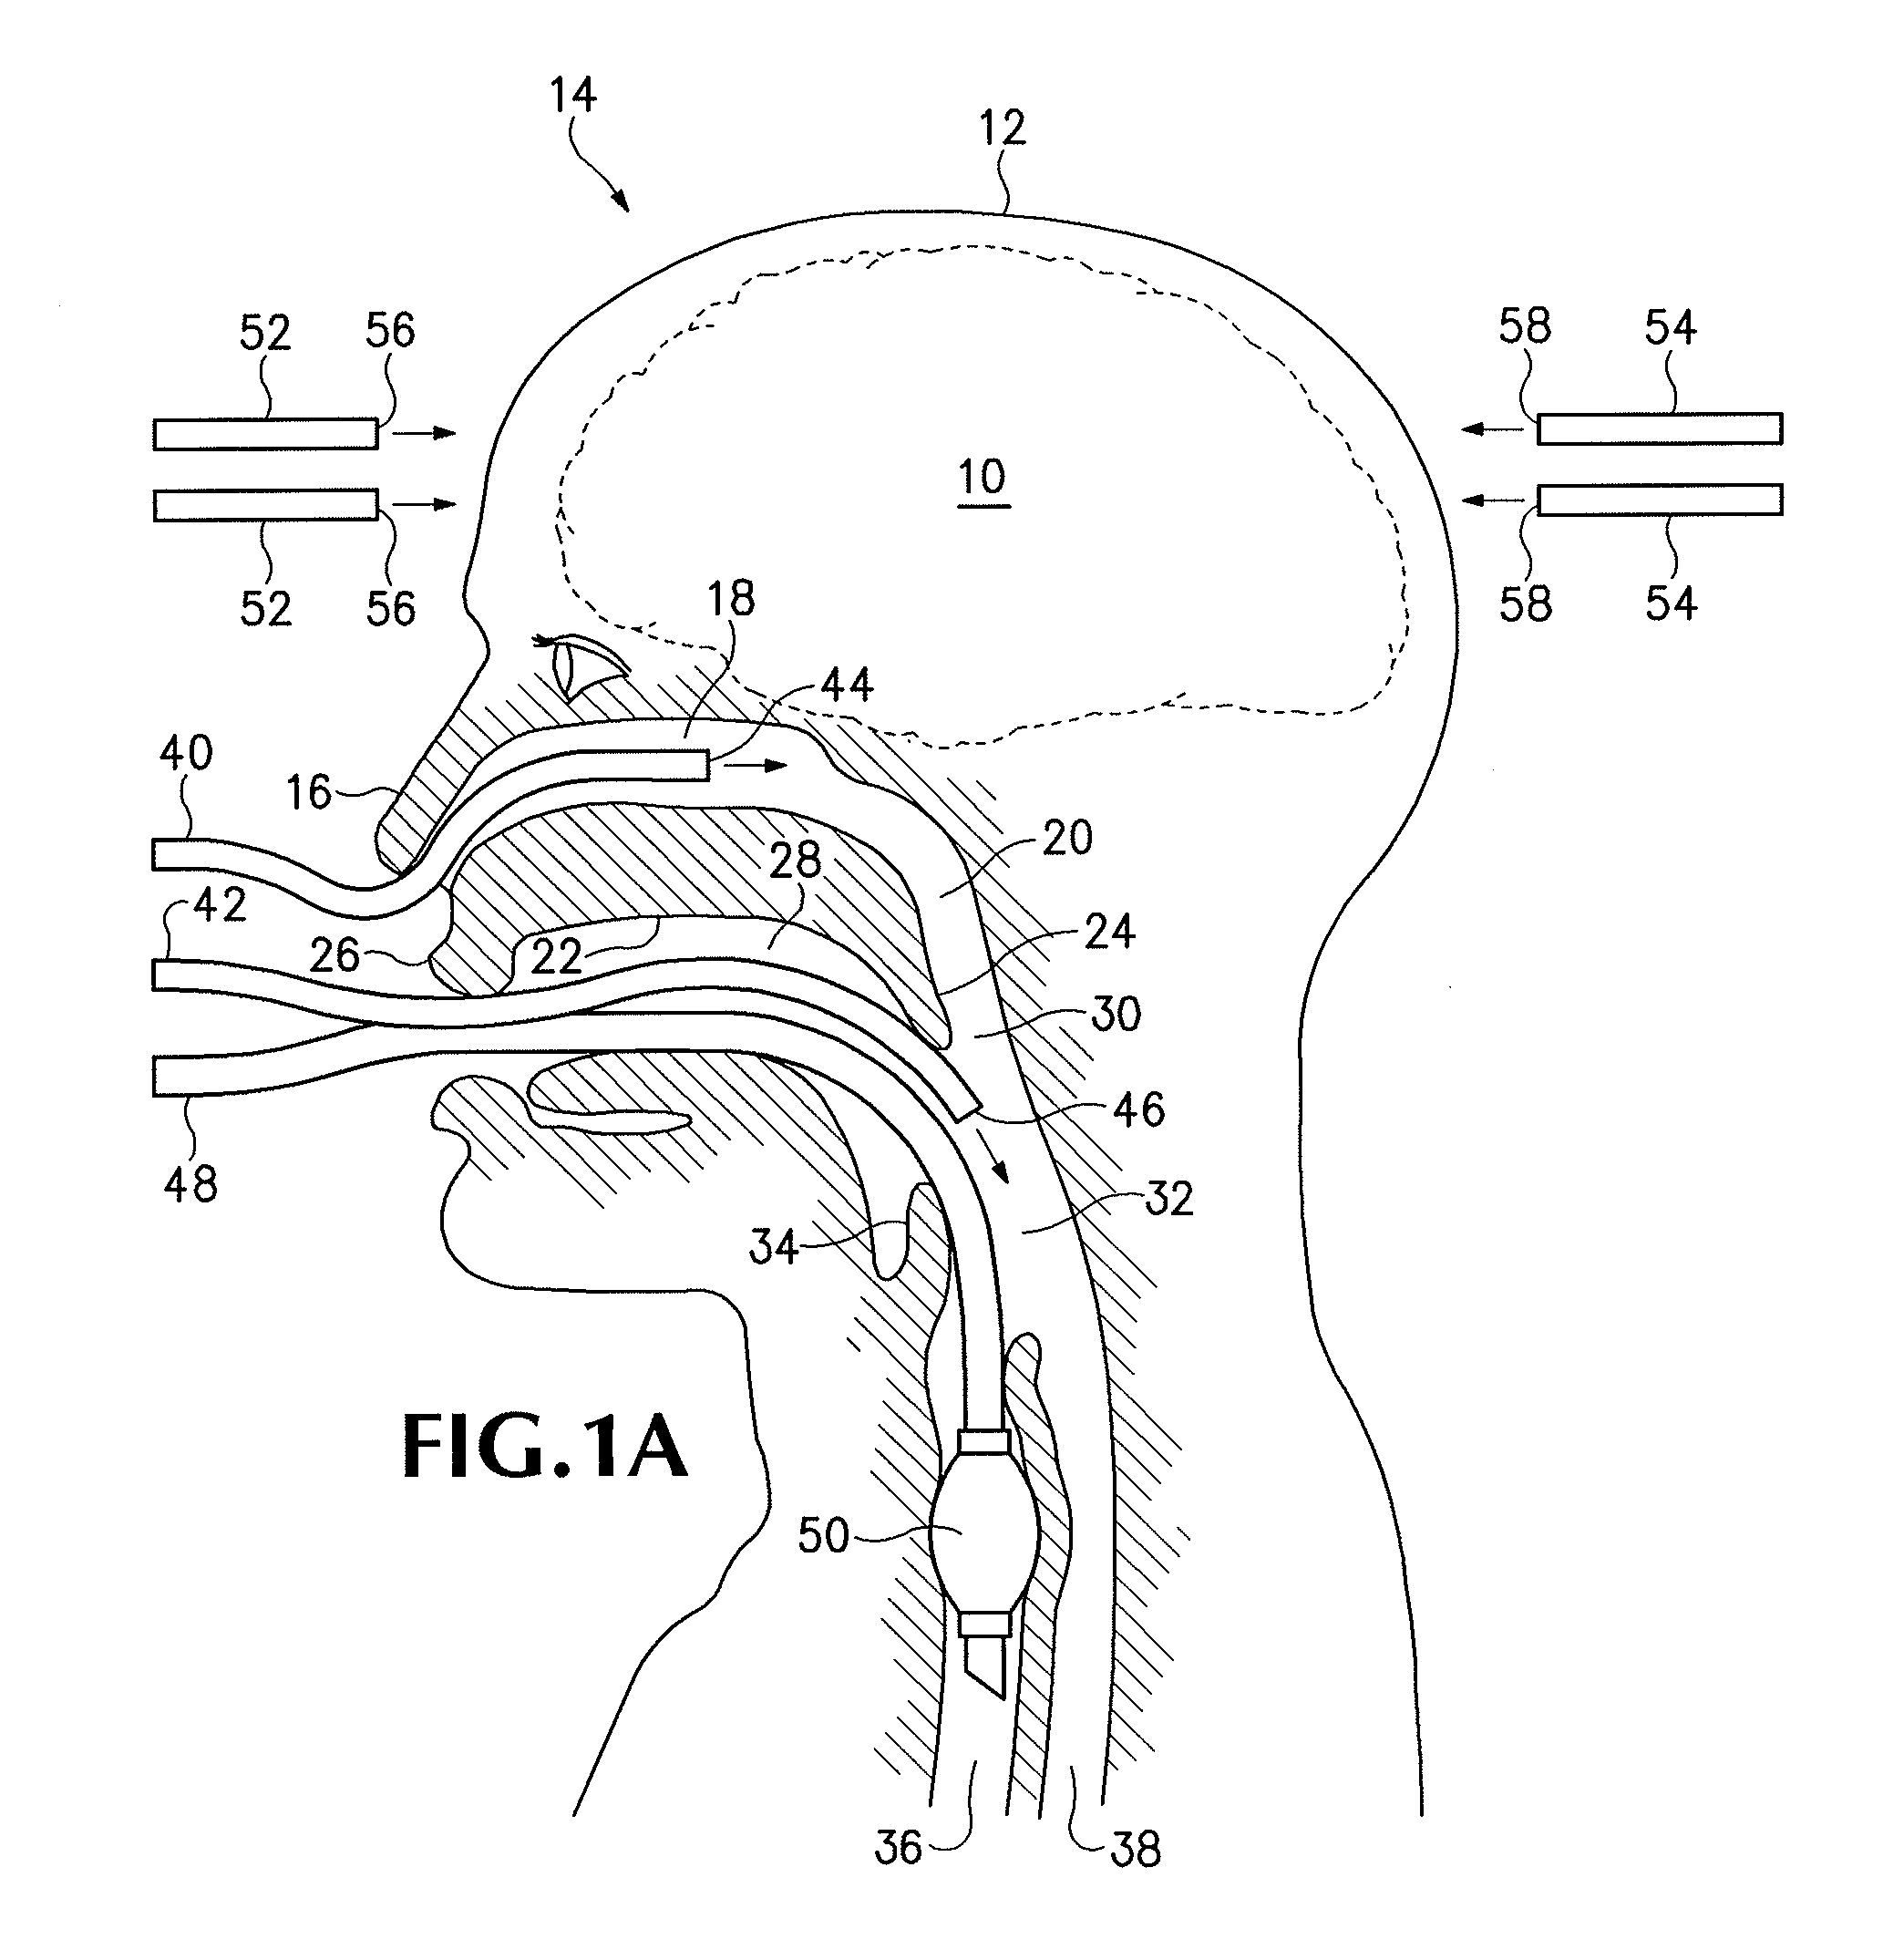 Rapid Cooling of Body and/or Brain by Irrigating with a Cooling Liquid